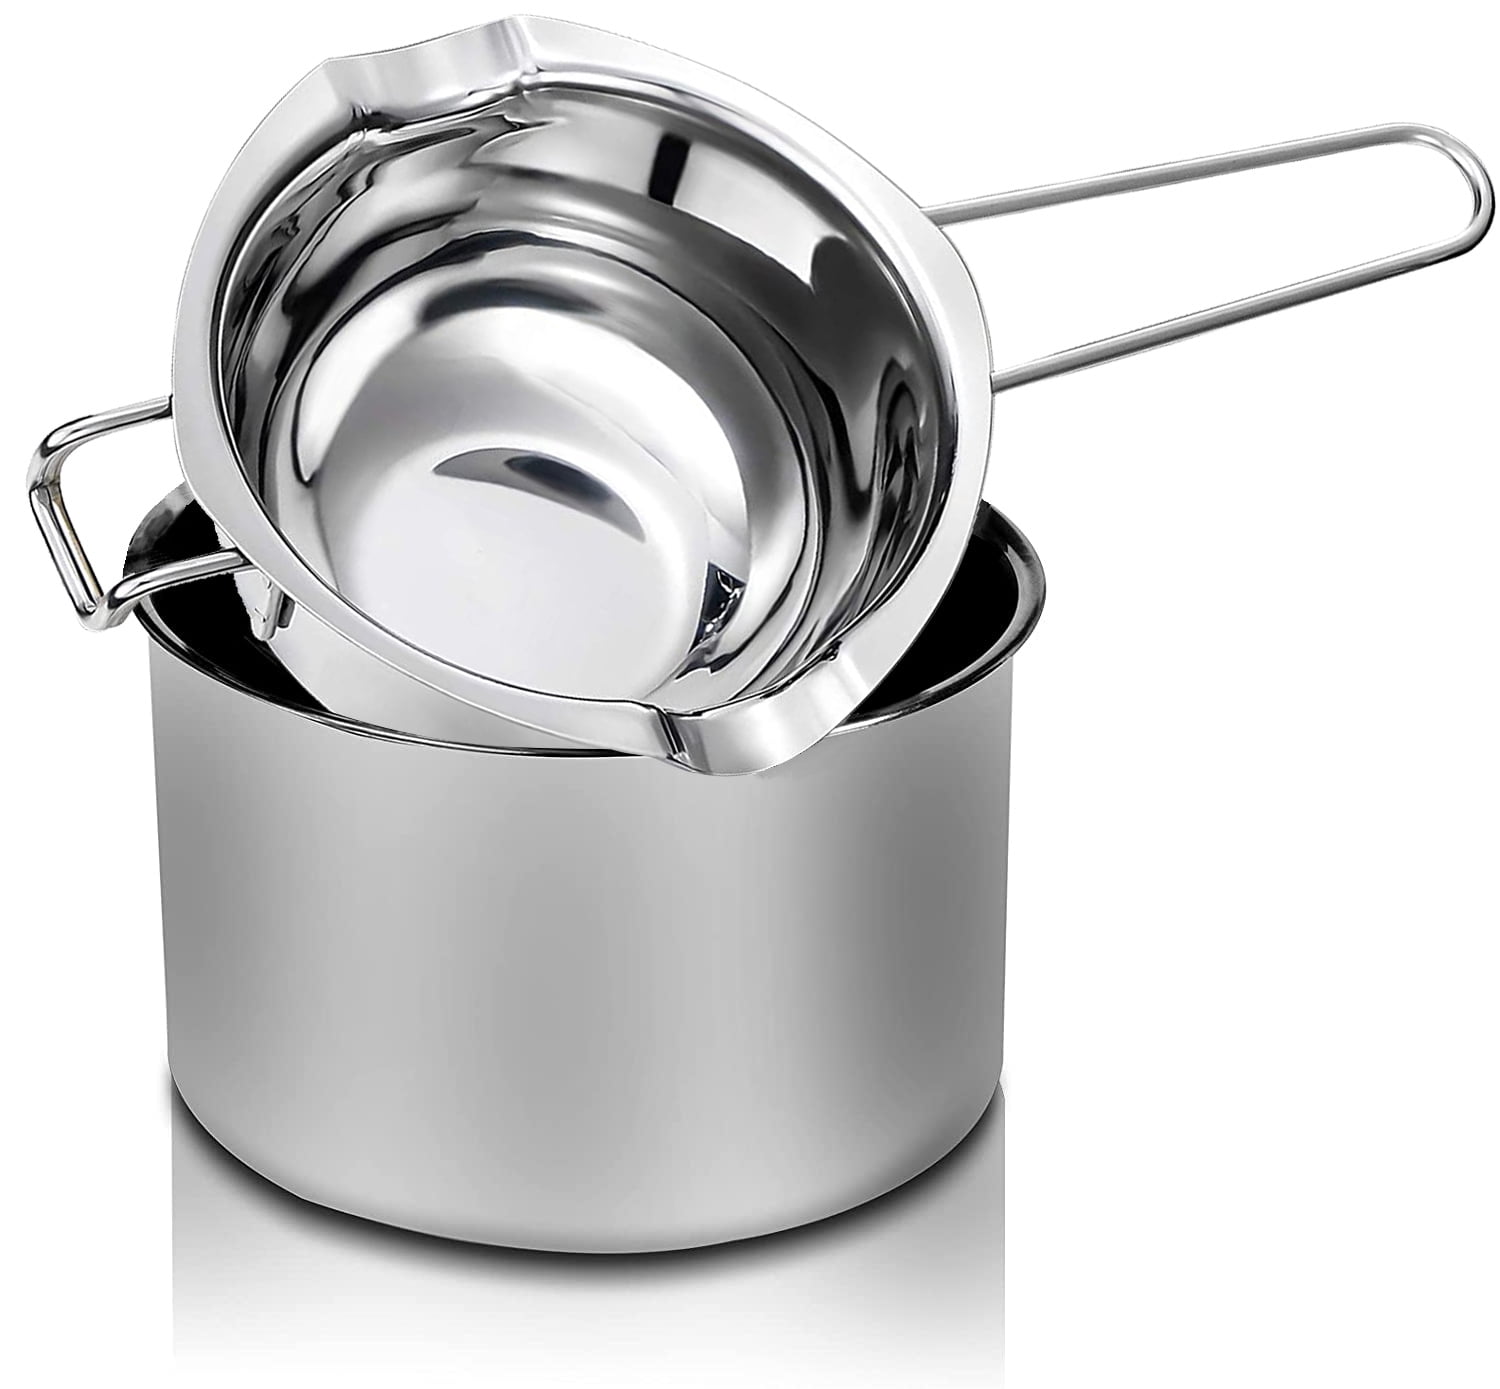 4PCs Large Stainless Steel Catering Deep Stock Soup Boiling Pot